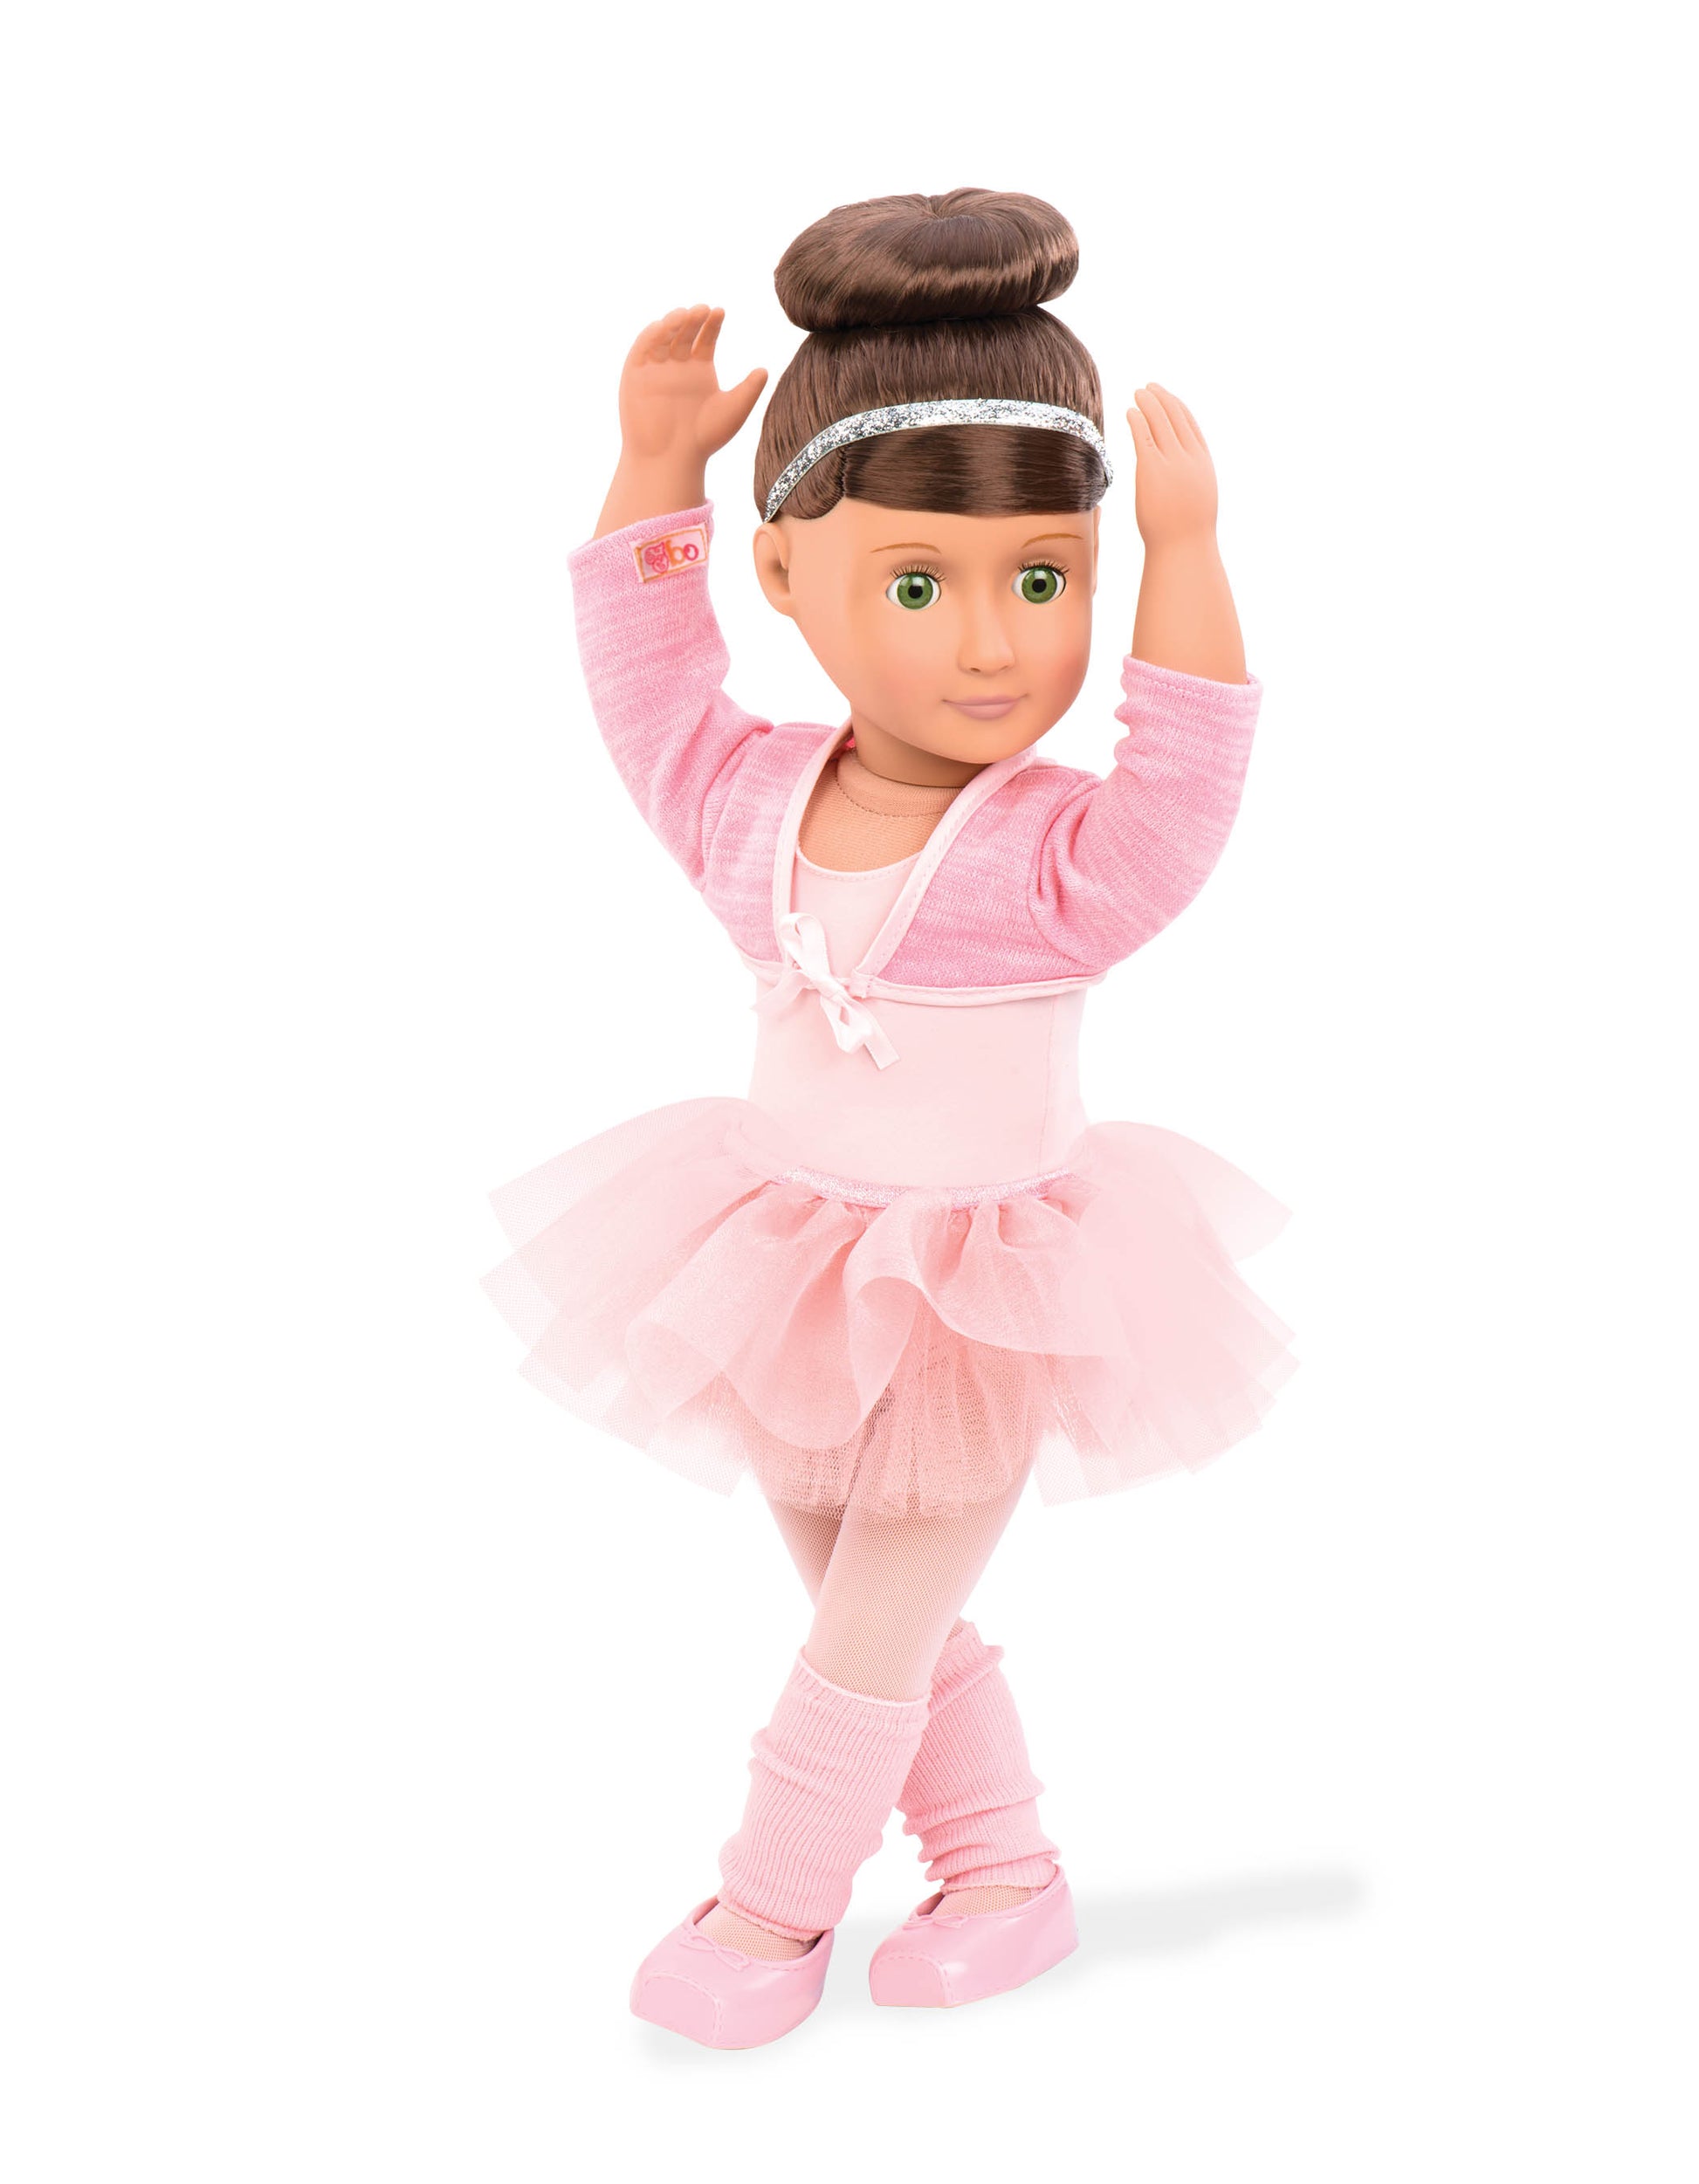 Our Generation 18" Deluxe Doll with Book - Sydney Lee is an amazing doll for creative play young girls. 